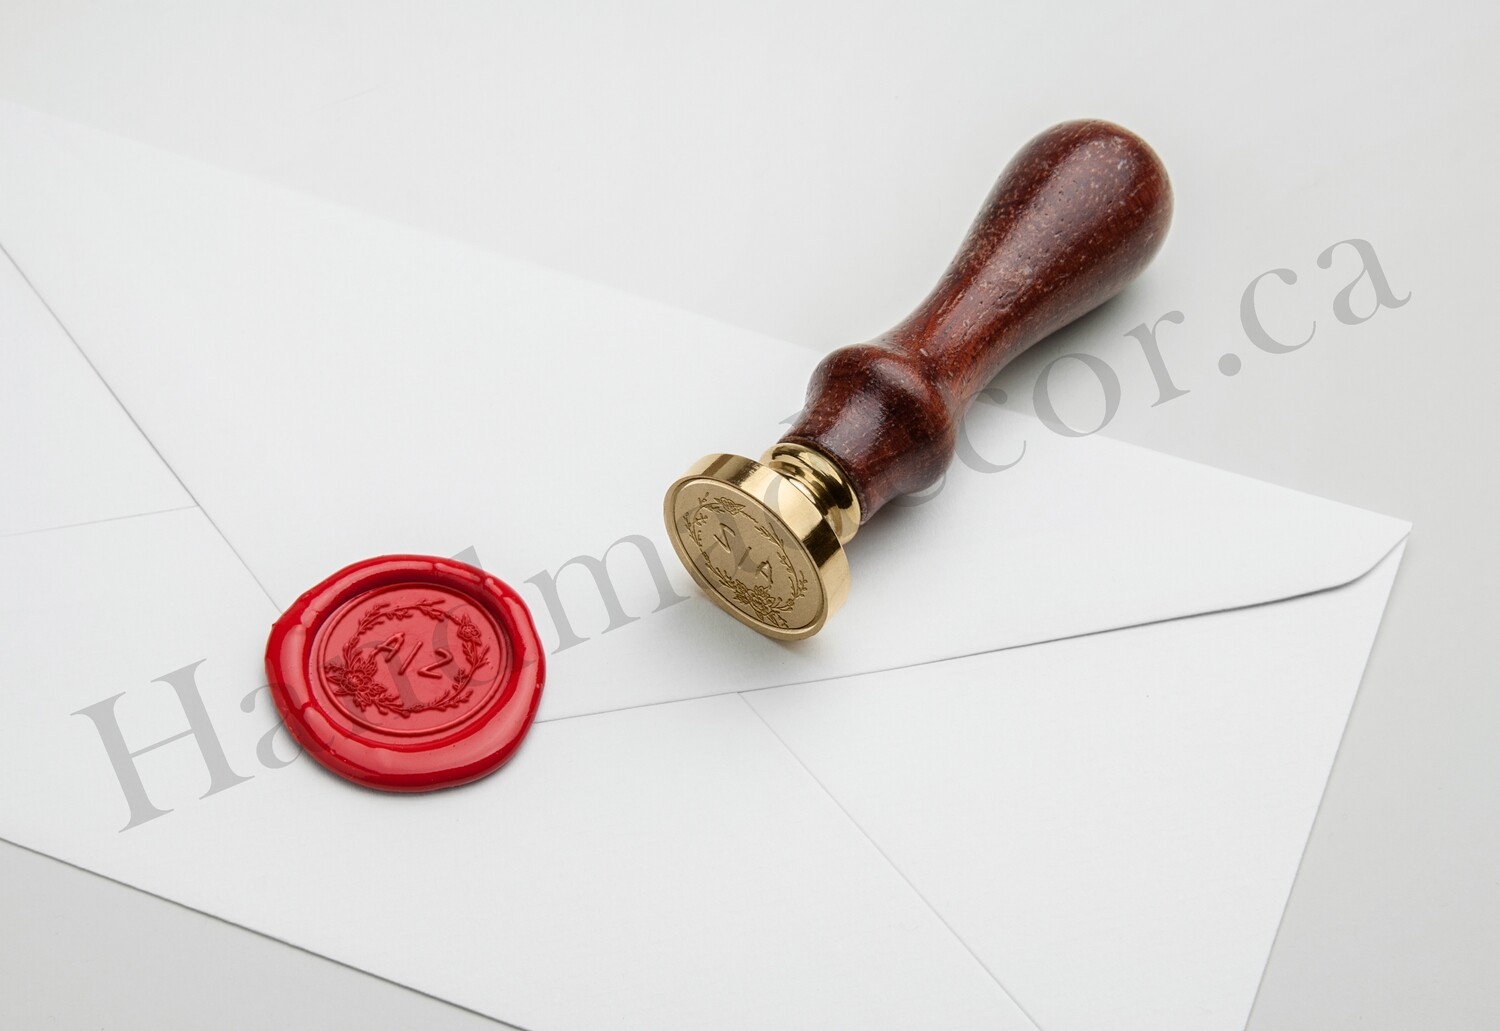 Custom 2 initials With Enclosed Round Symbolic Flower Border Wax Seal Stamp